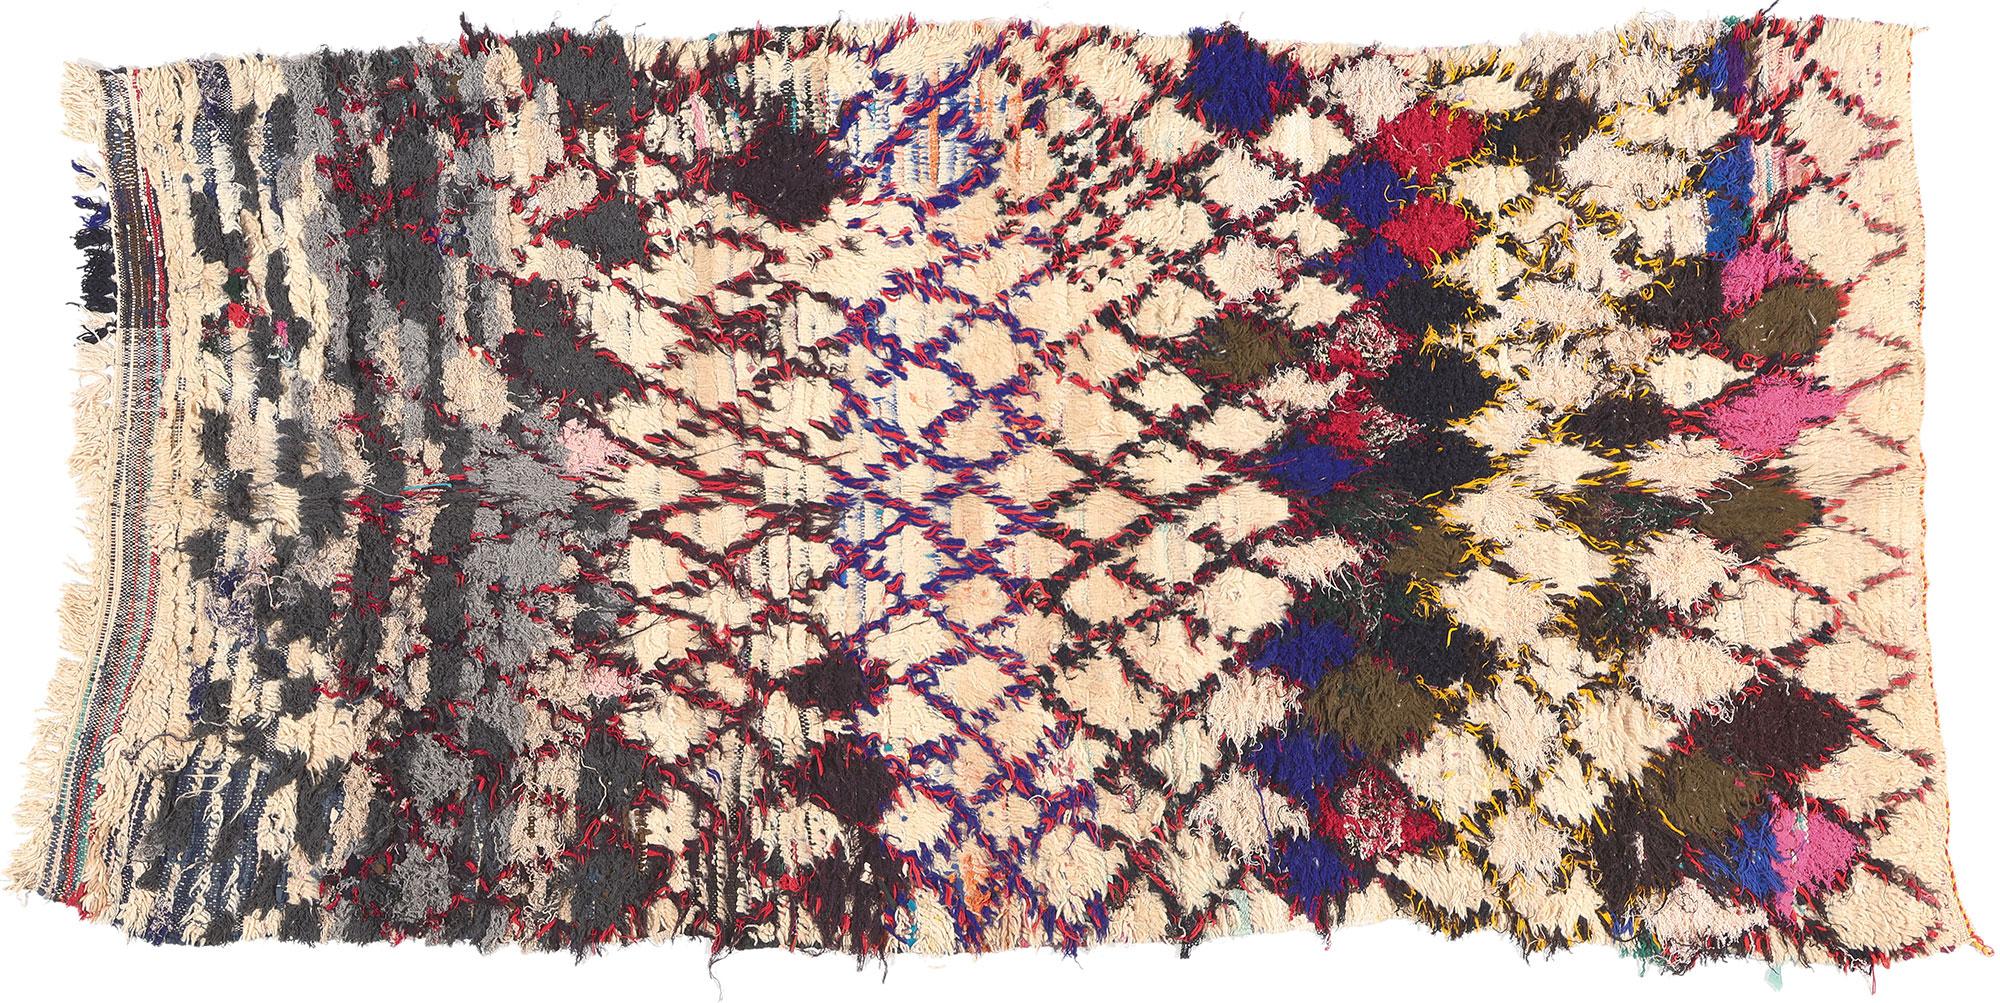 20469 Vintage Boucherouite Boujad Moroccan Rag Rug, 04'10 x 09'02. Indulge in the lively energy exuded by Boujad Boucherouite rugs, emanating from the lively streets of Boujad in the Khouribga region. Skillfully woven by Berber tribes, particularly